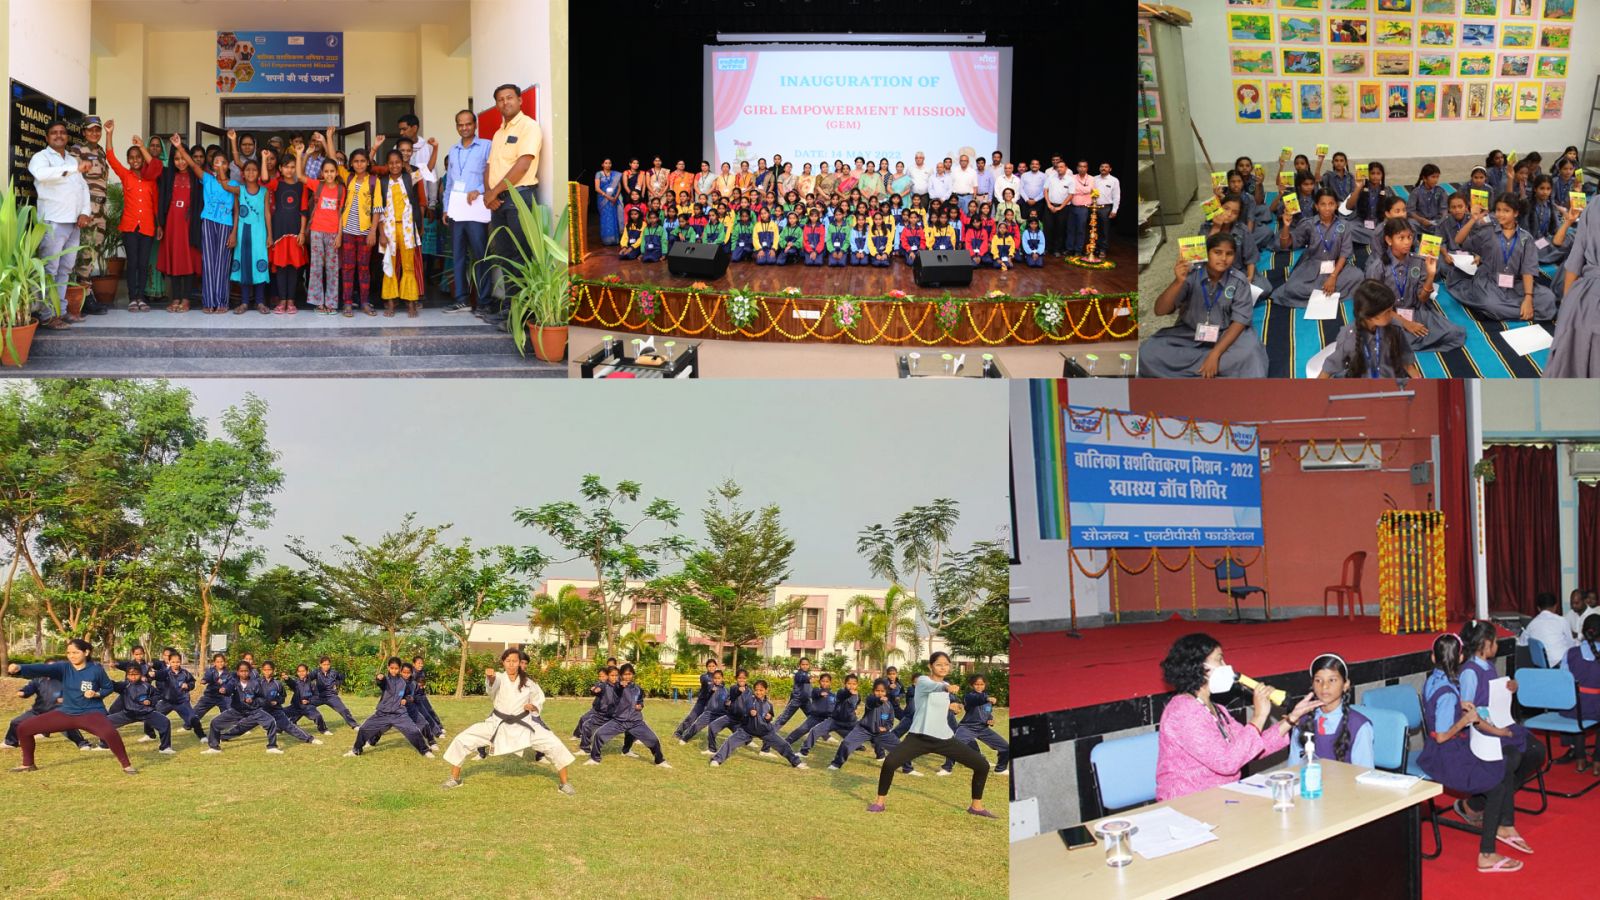 NTPC’s Girl Empowerment Mission touches newer heights of success; empowers girls across different project locations in the country